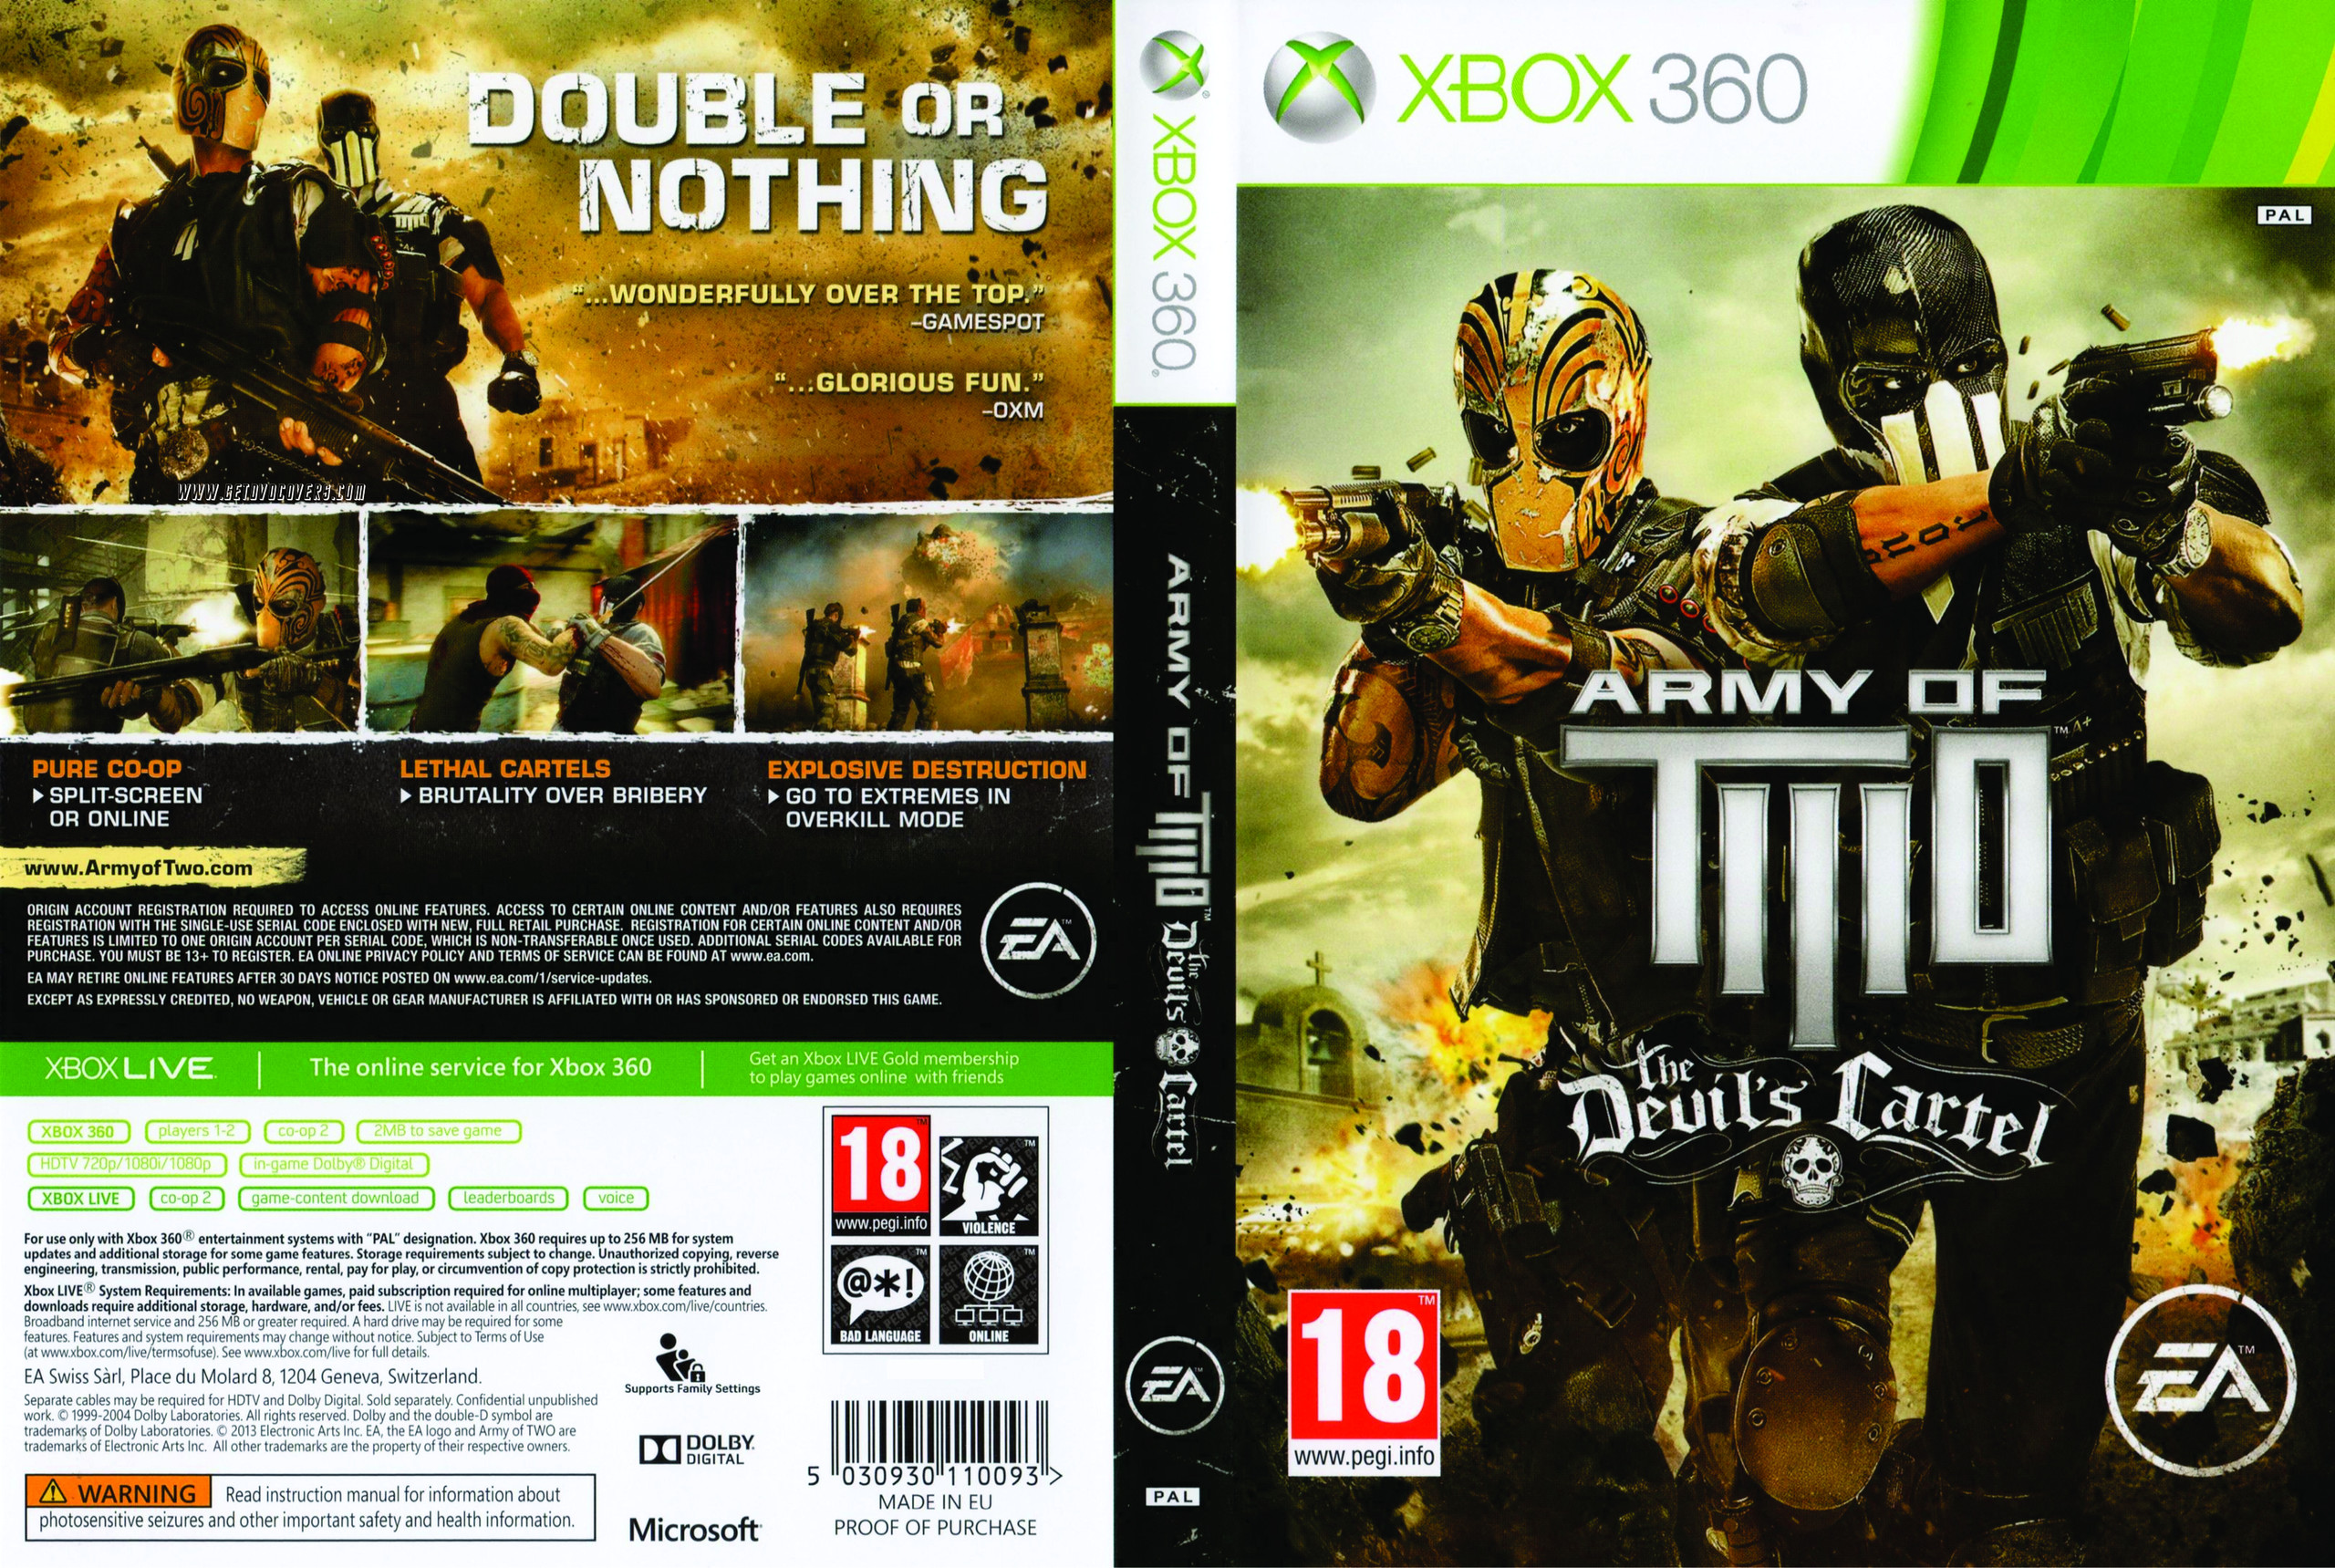 Xbox 360 год игры. Army of two Xbox 360 обложка. Army of two на Икс бокс 360. Обложки к играм Xbox 360 Army of two. Army of two the Devil's Cartel Xbox 360.